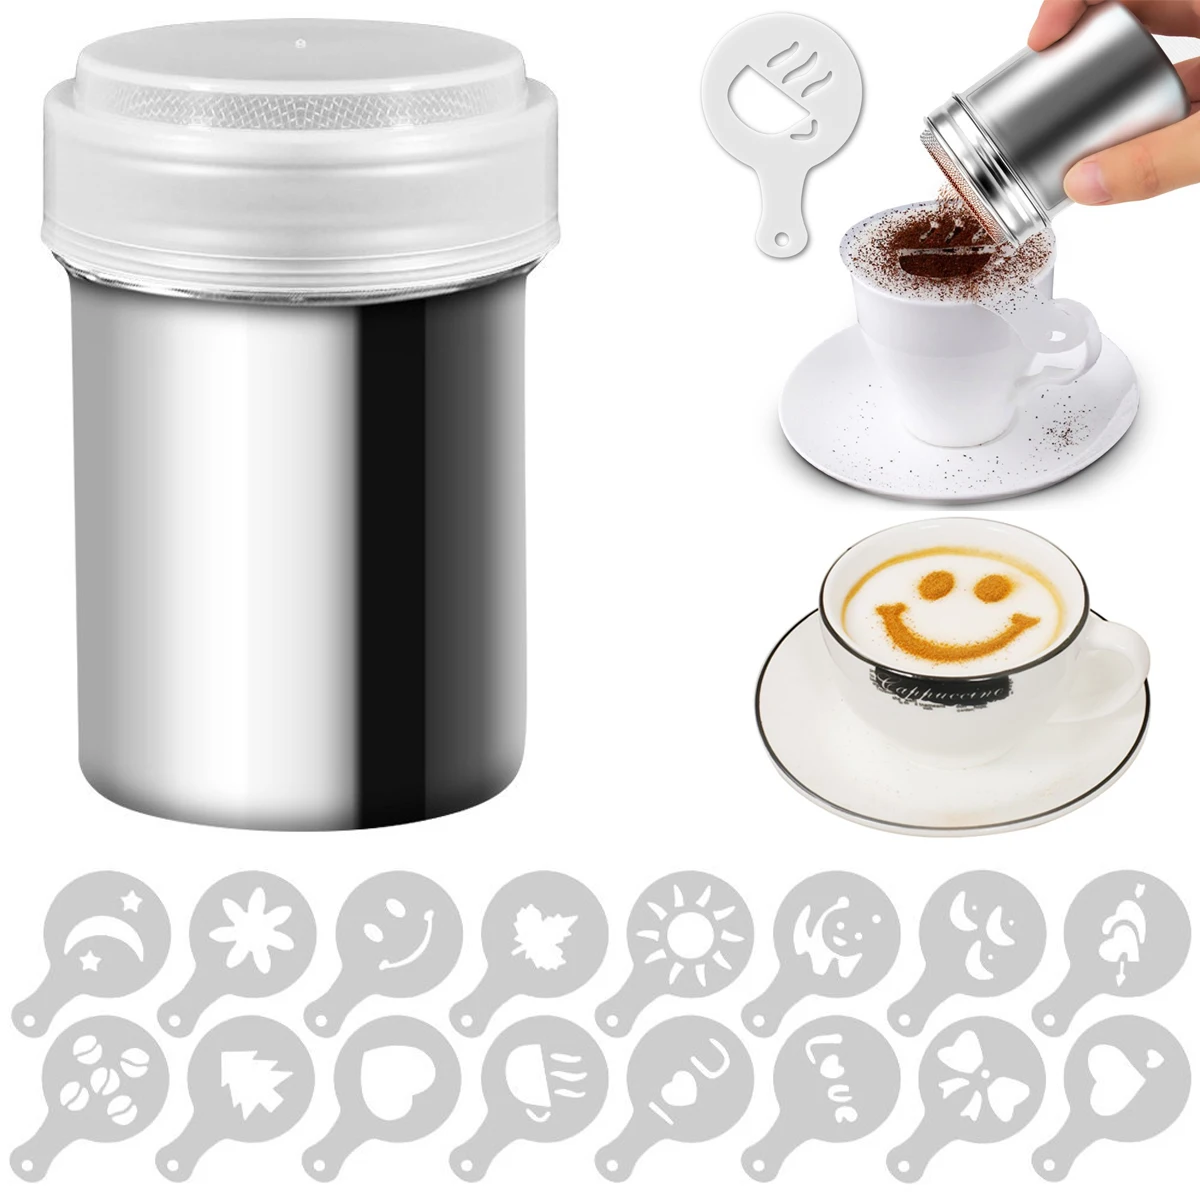 Stainless Steel Chocolate Shaker Cocoa Flour Coffee Sifter 8/16Pcs Cappuccino Template Strew Pad Duster Spray Tools D30 | Дом и сад